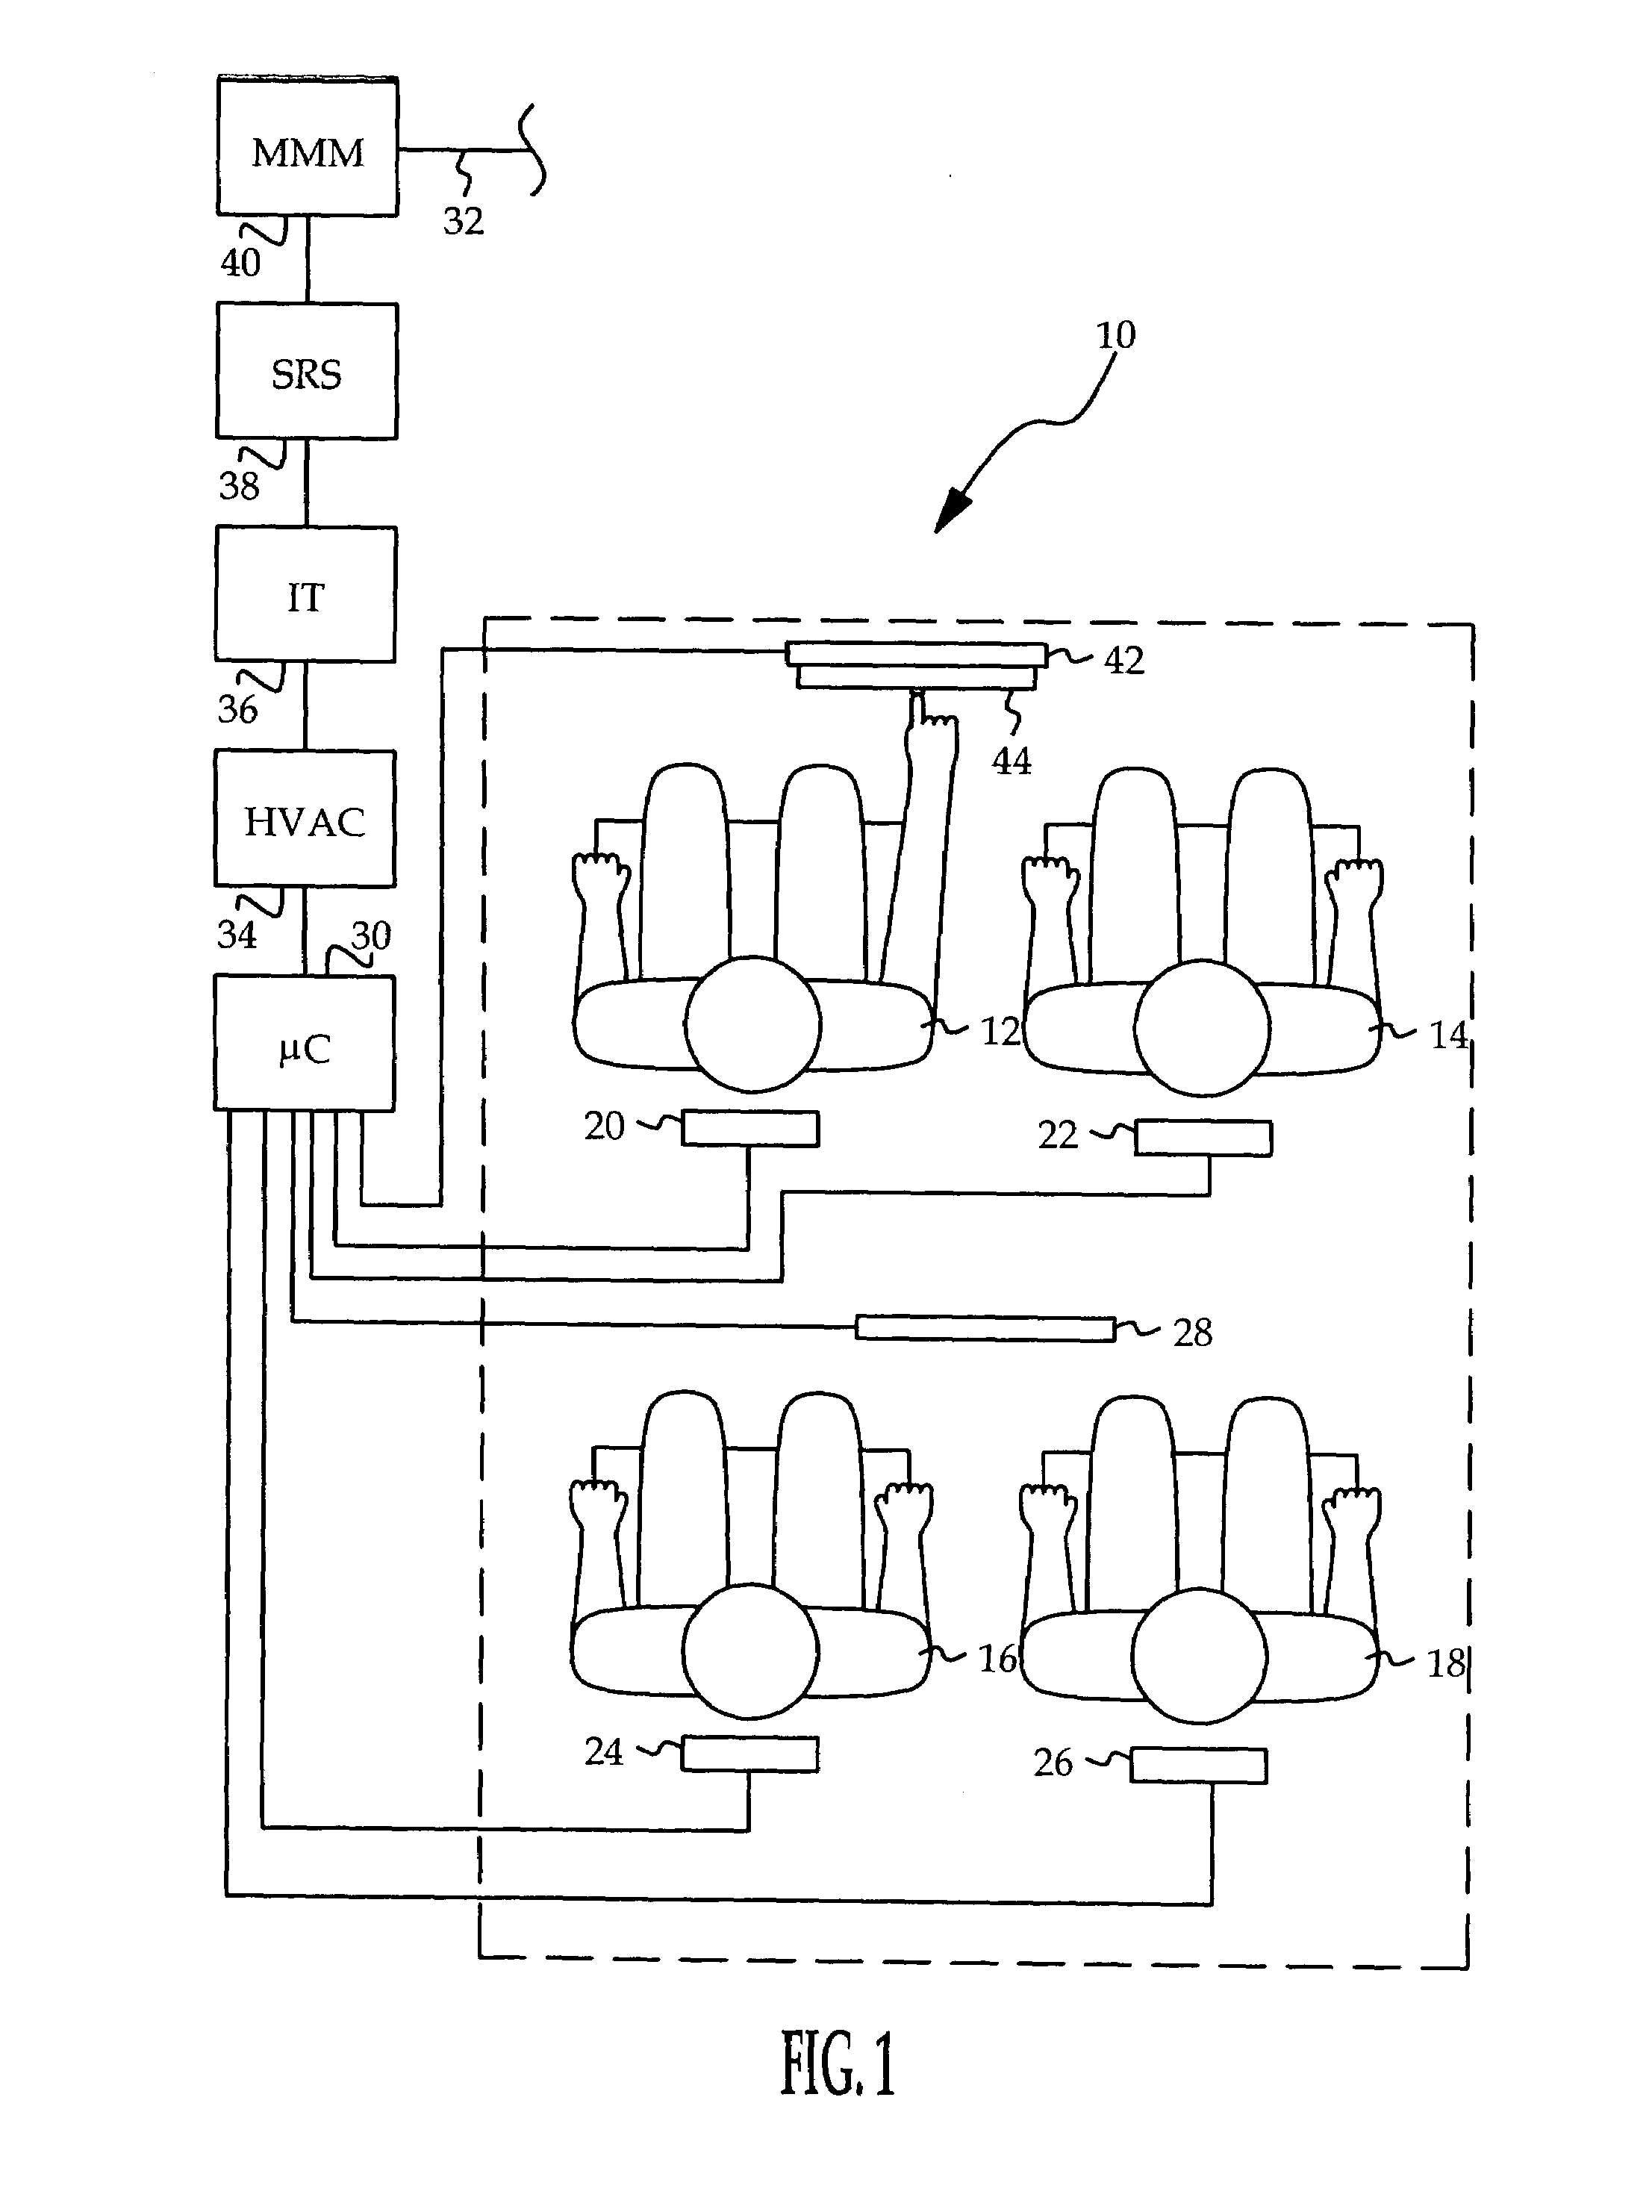 Universal occupant detection and discrimination system for a multi-place vehicle